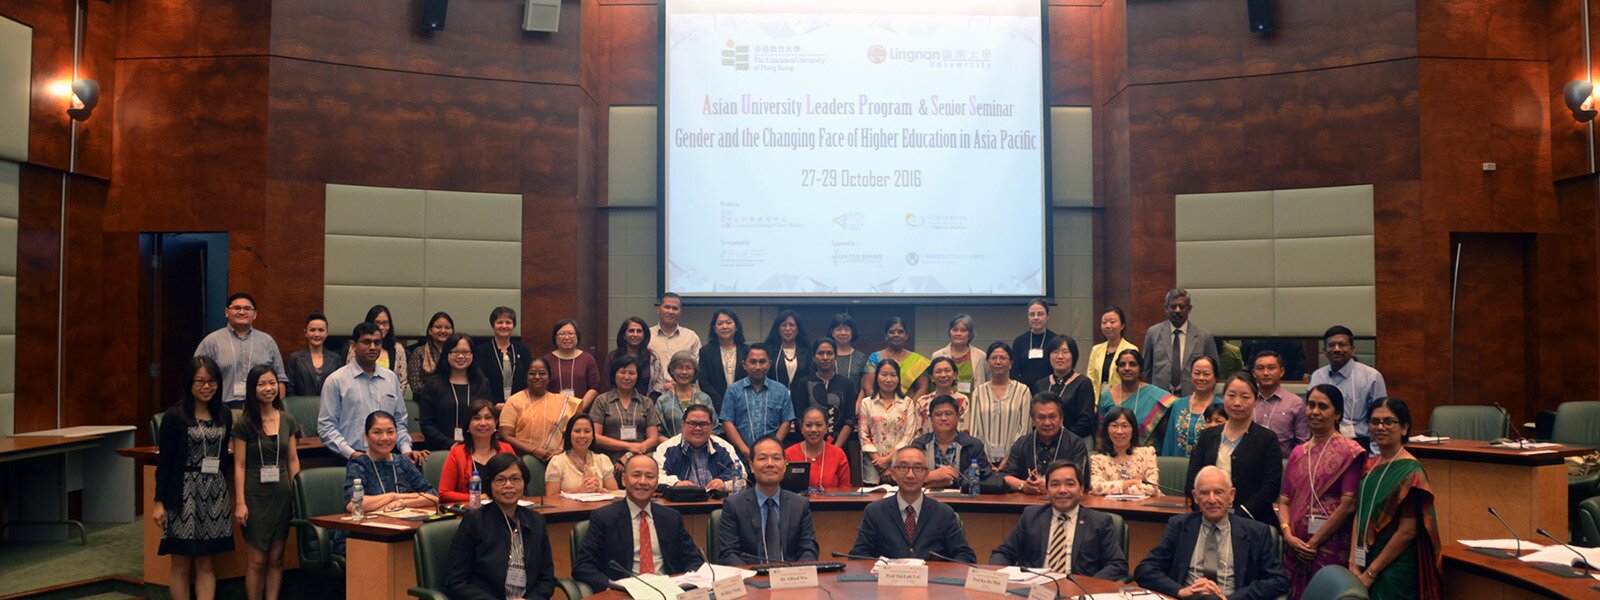 Scholars and Experts Gather at EdUHK to Discuss Gender and the Changing Face of Higher Education in the Asia-Pacific